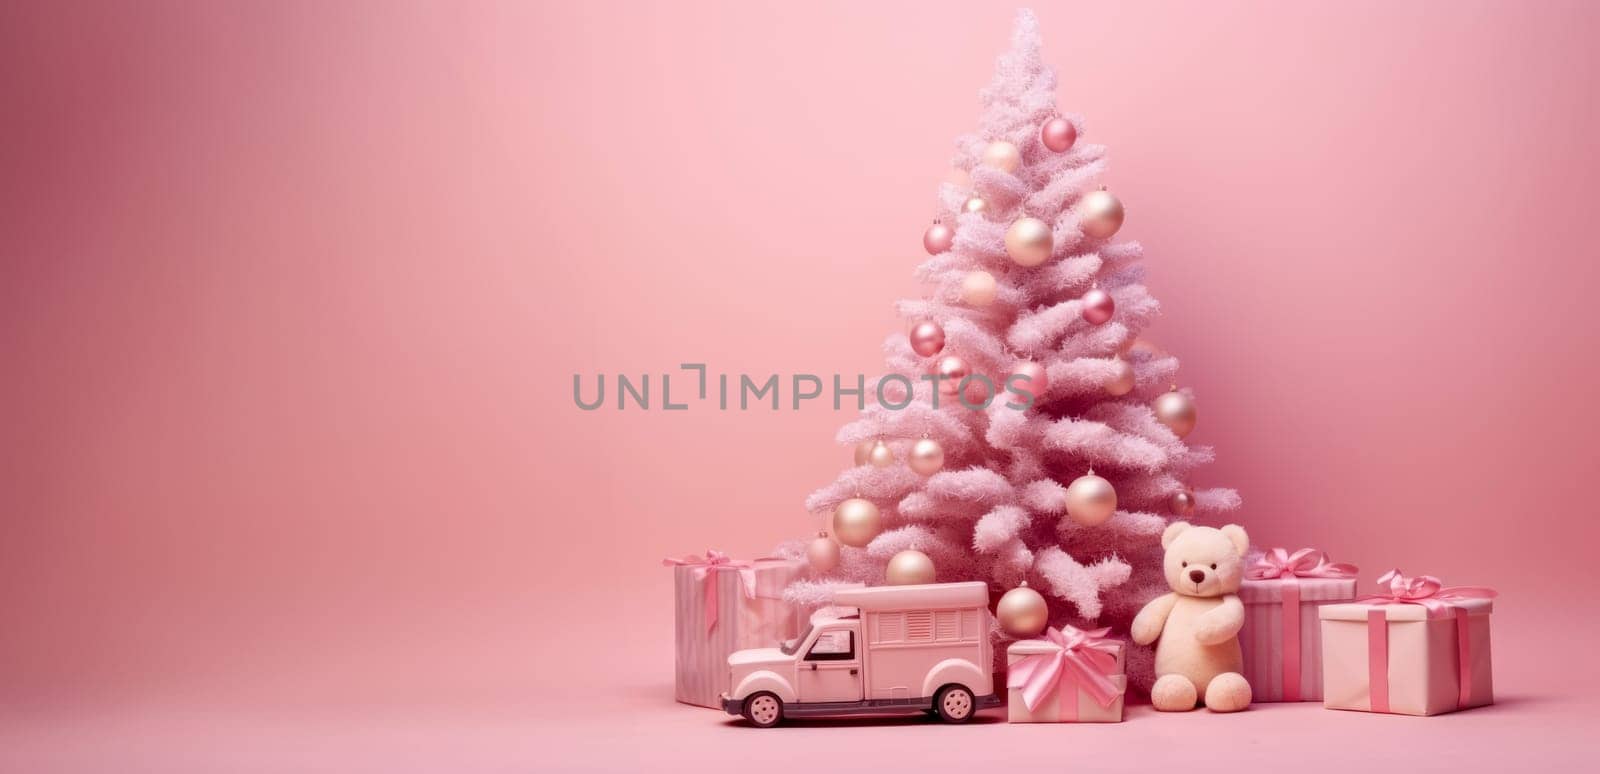 Christmas pink background with New Year tree and gift toys, Christmas gift box, fir tree and decorations on pink layout. Close-up with copy space.